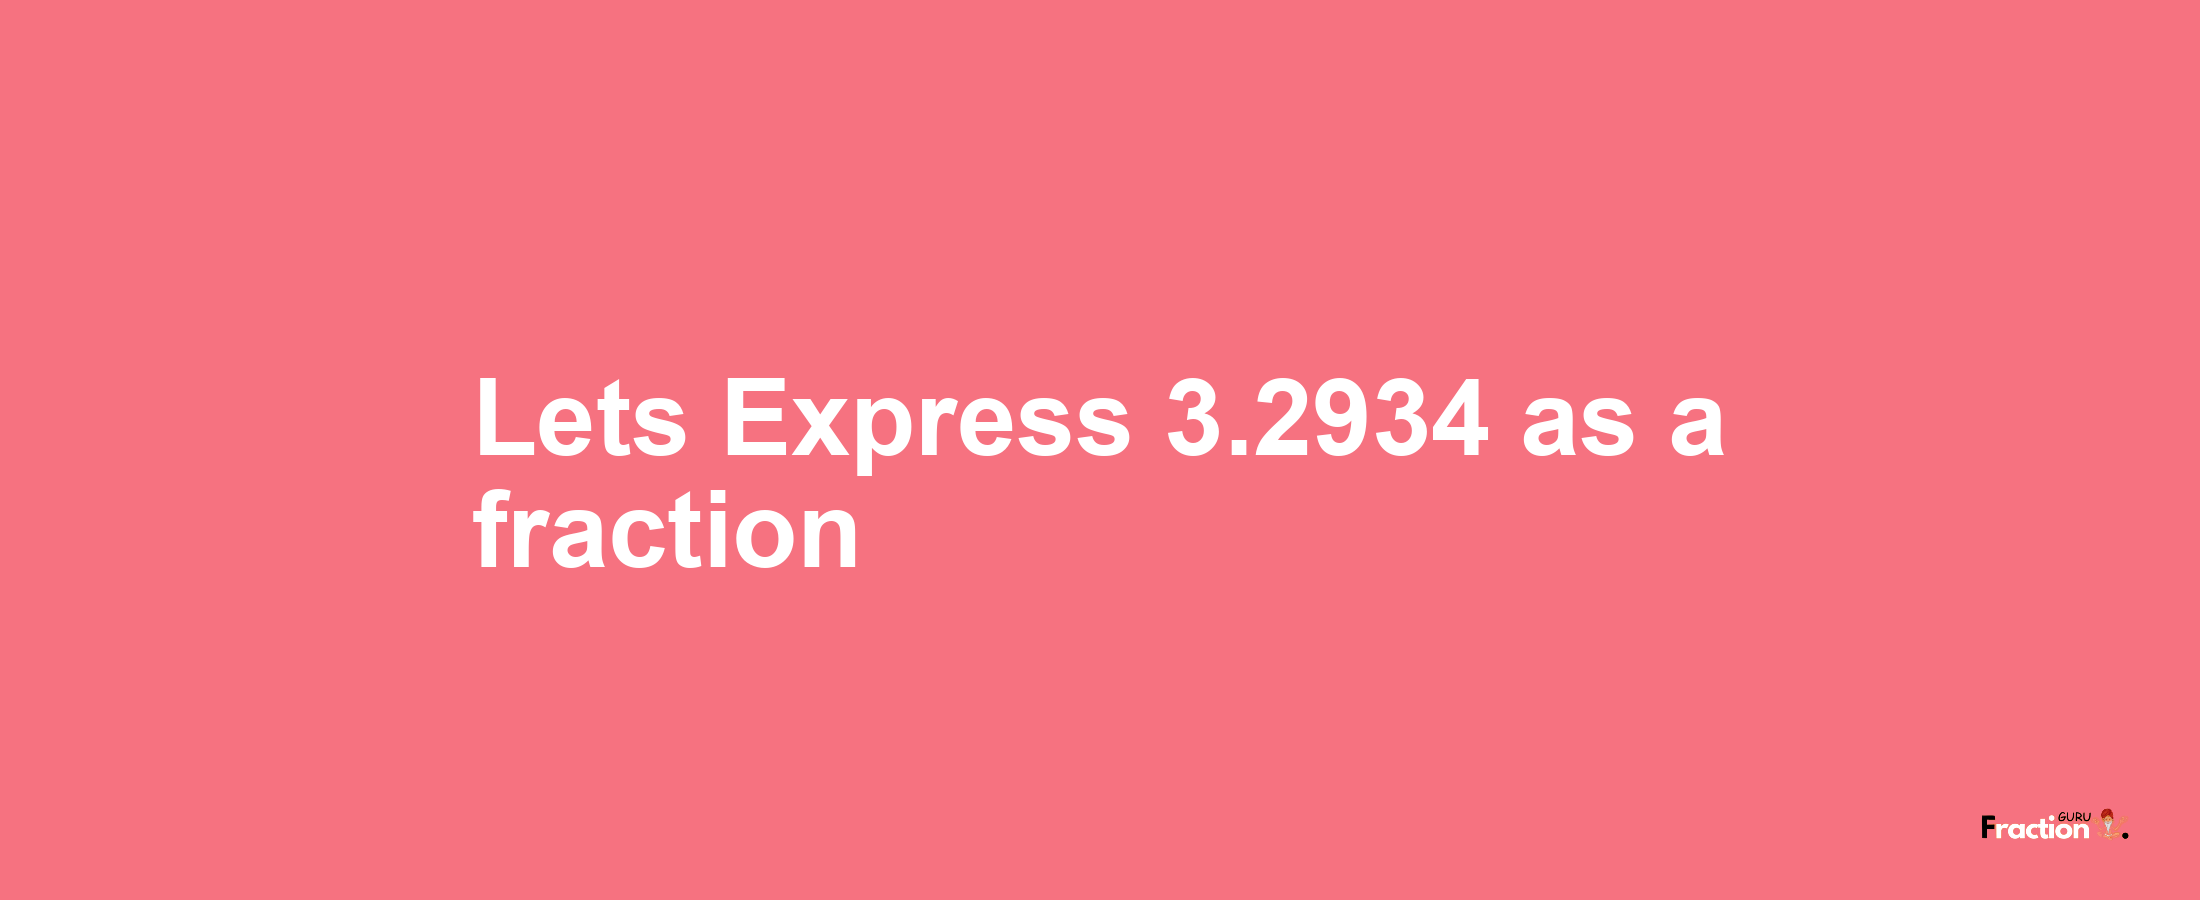 Lets Express 3.2934 as afraction